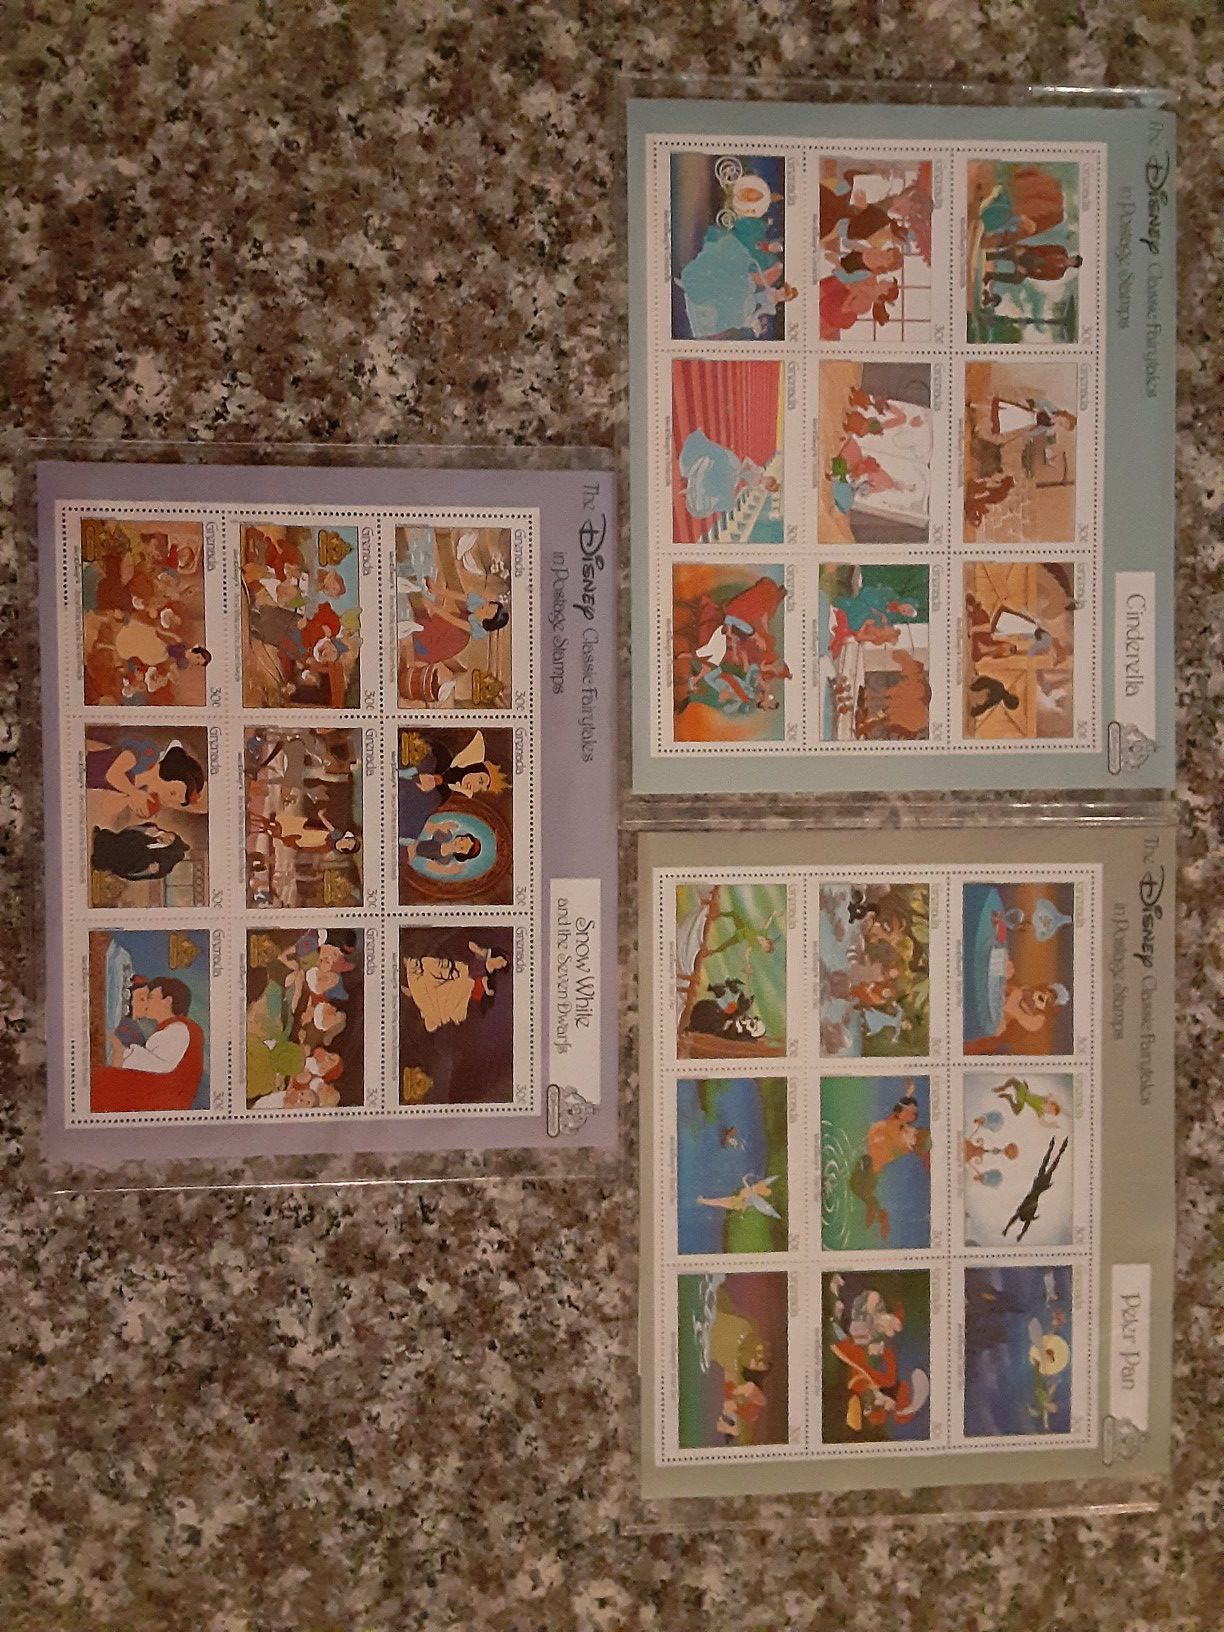 Disney stamp collection